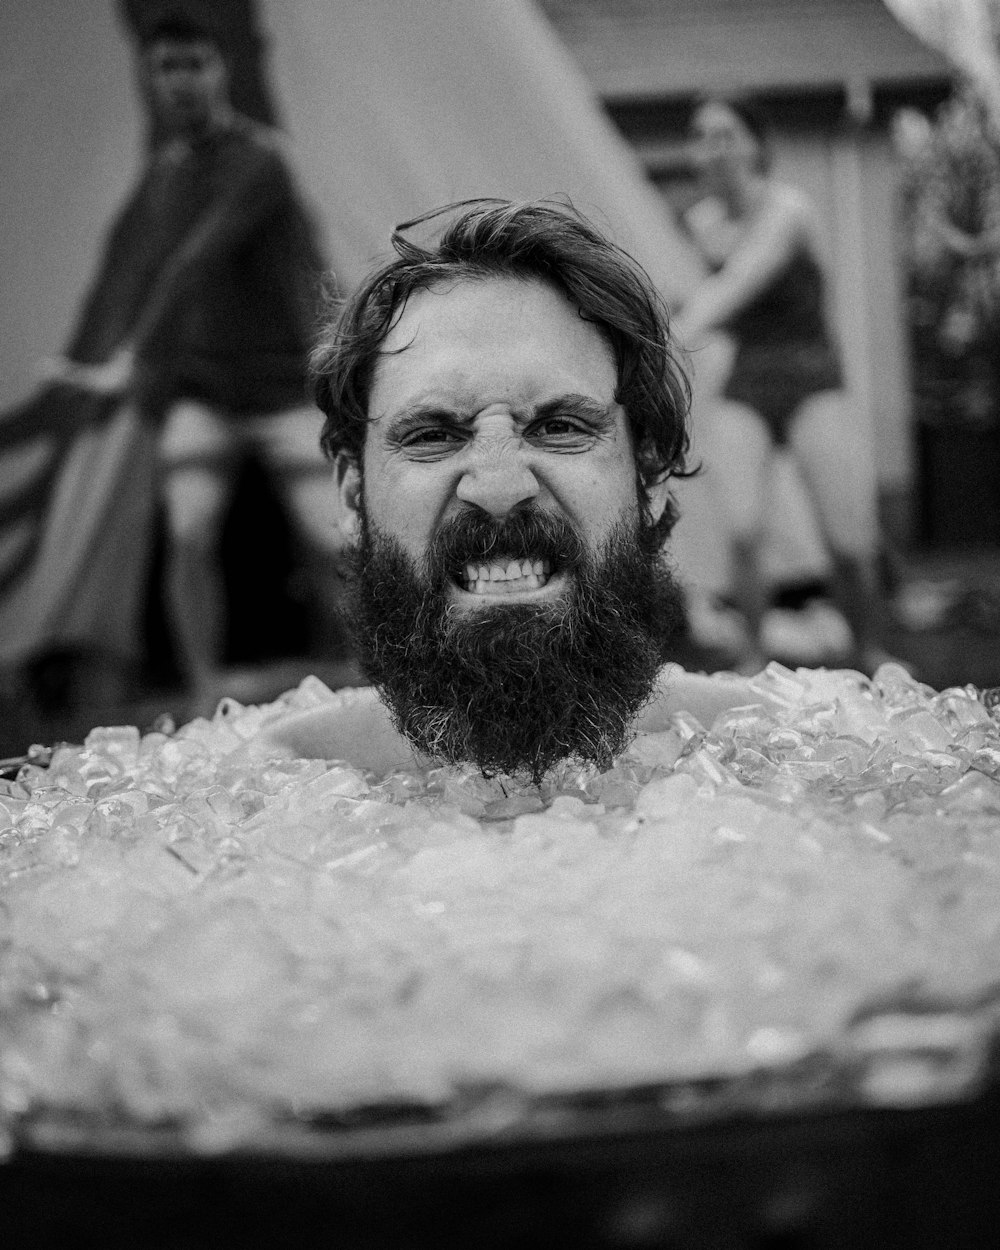 a man with a beard is in a tub of ice